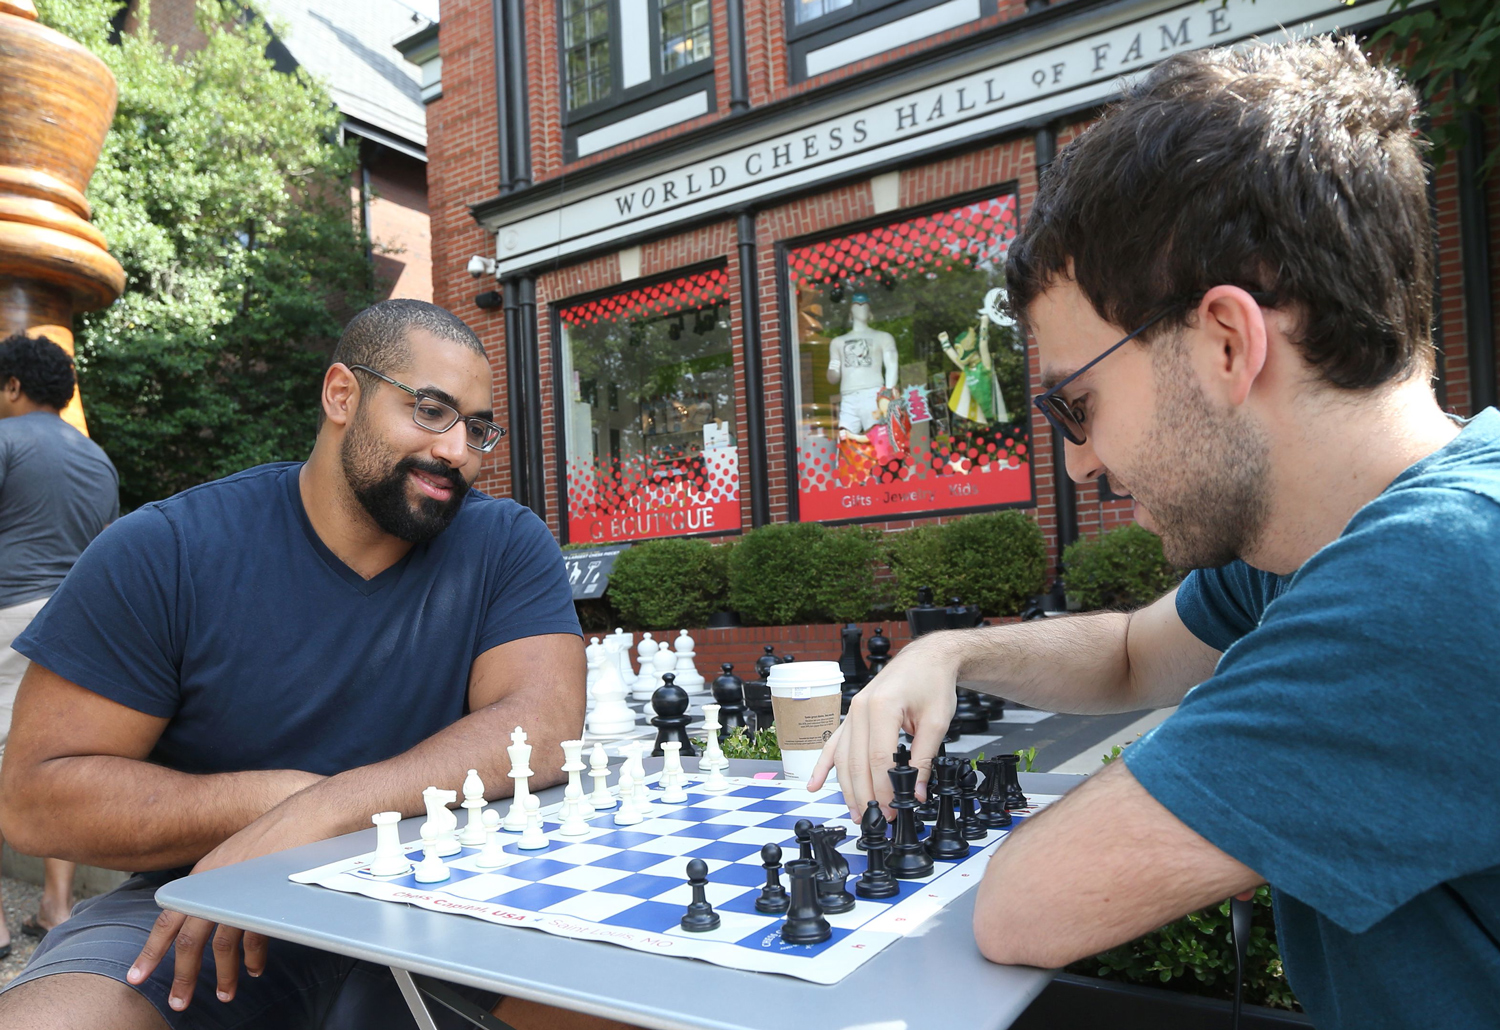 John Urschel and another man sit at an outdoor table and play chess in front of a storefront with a sign reading World Chess Hall of Fame.